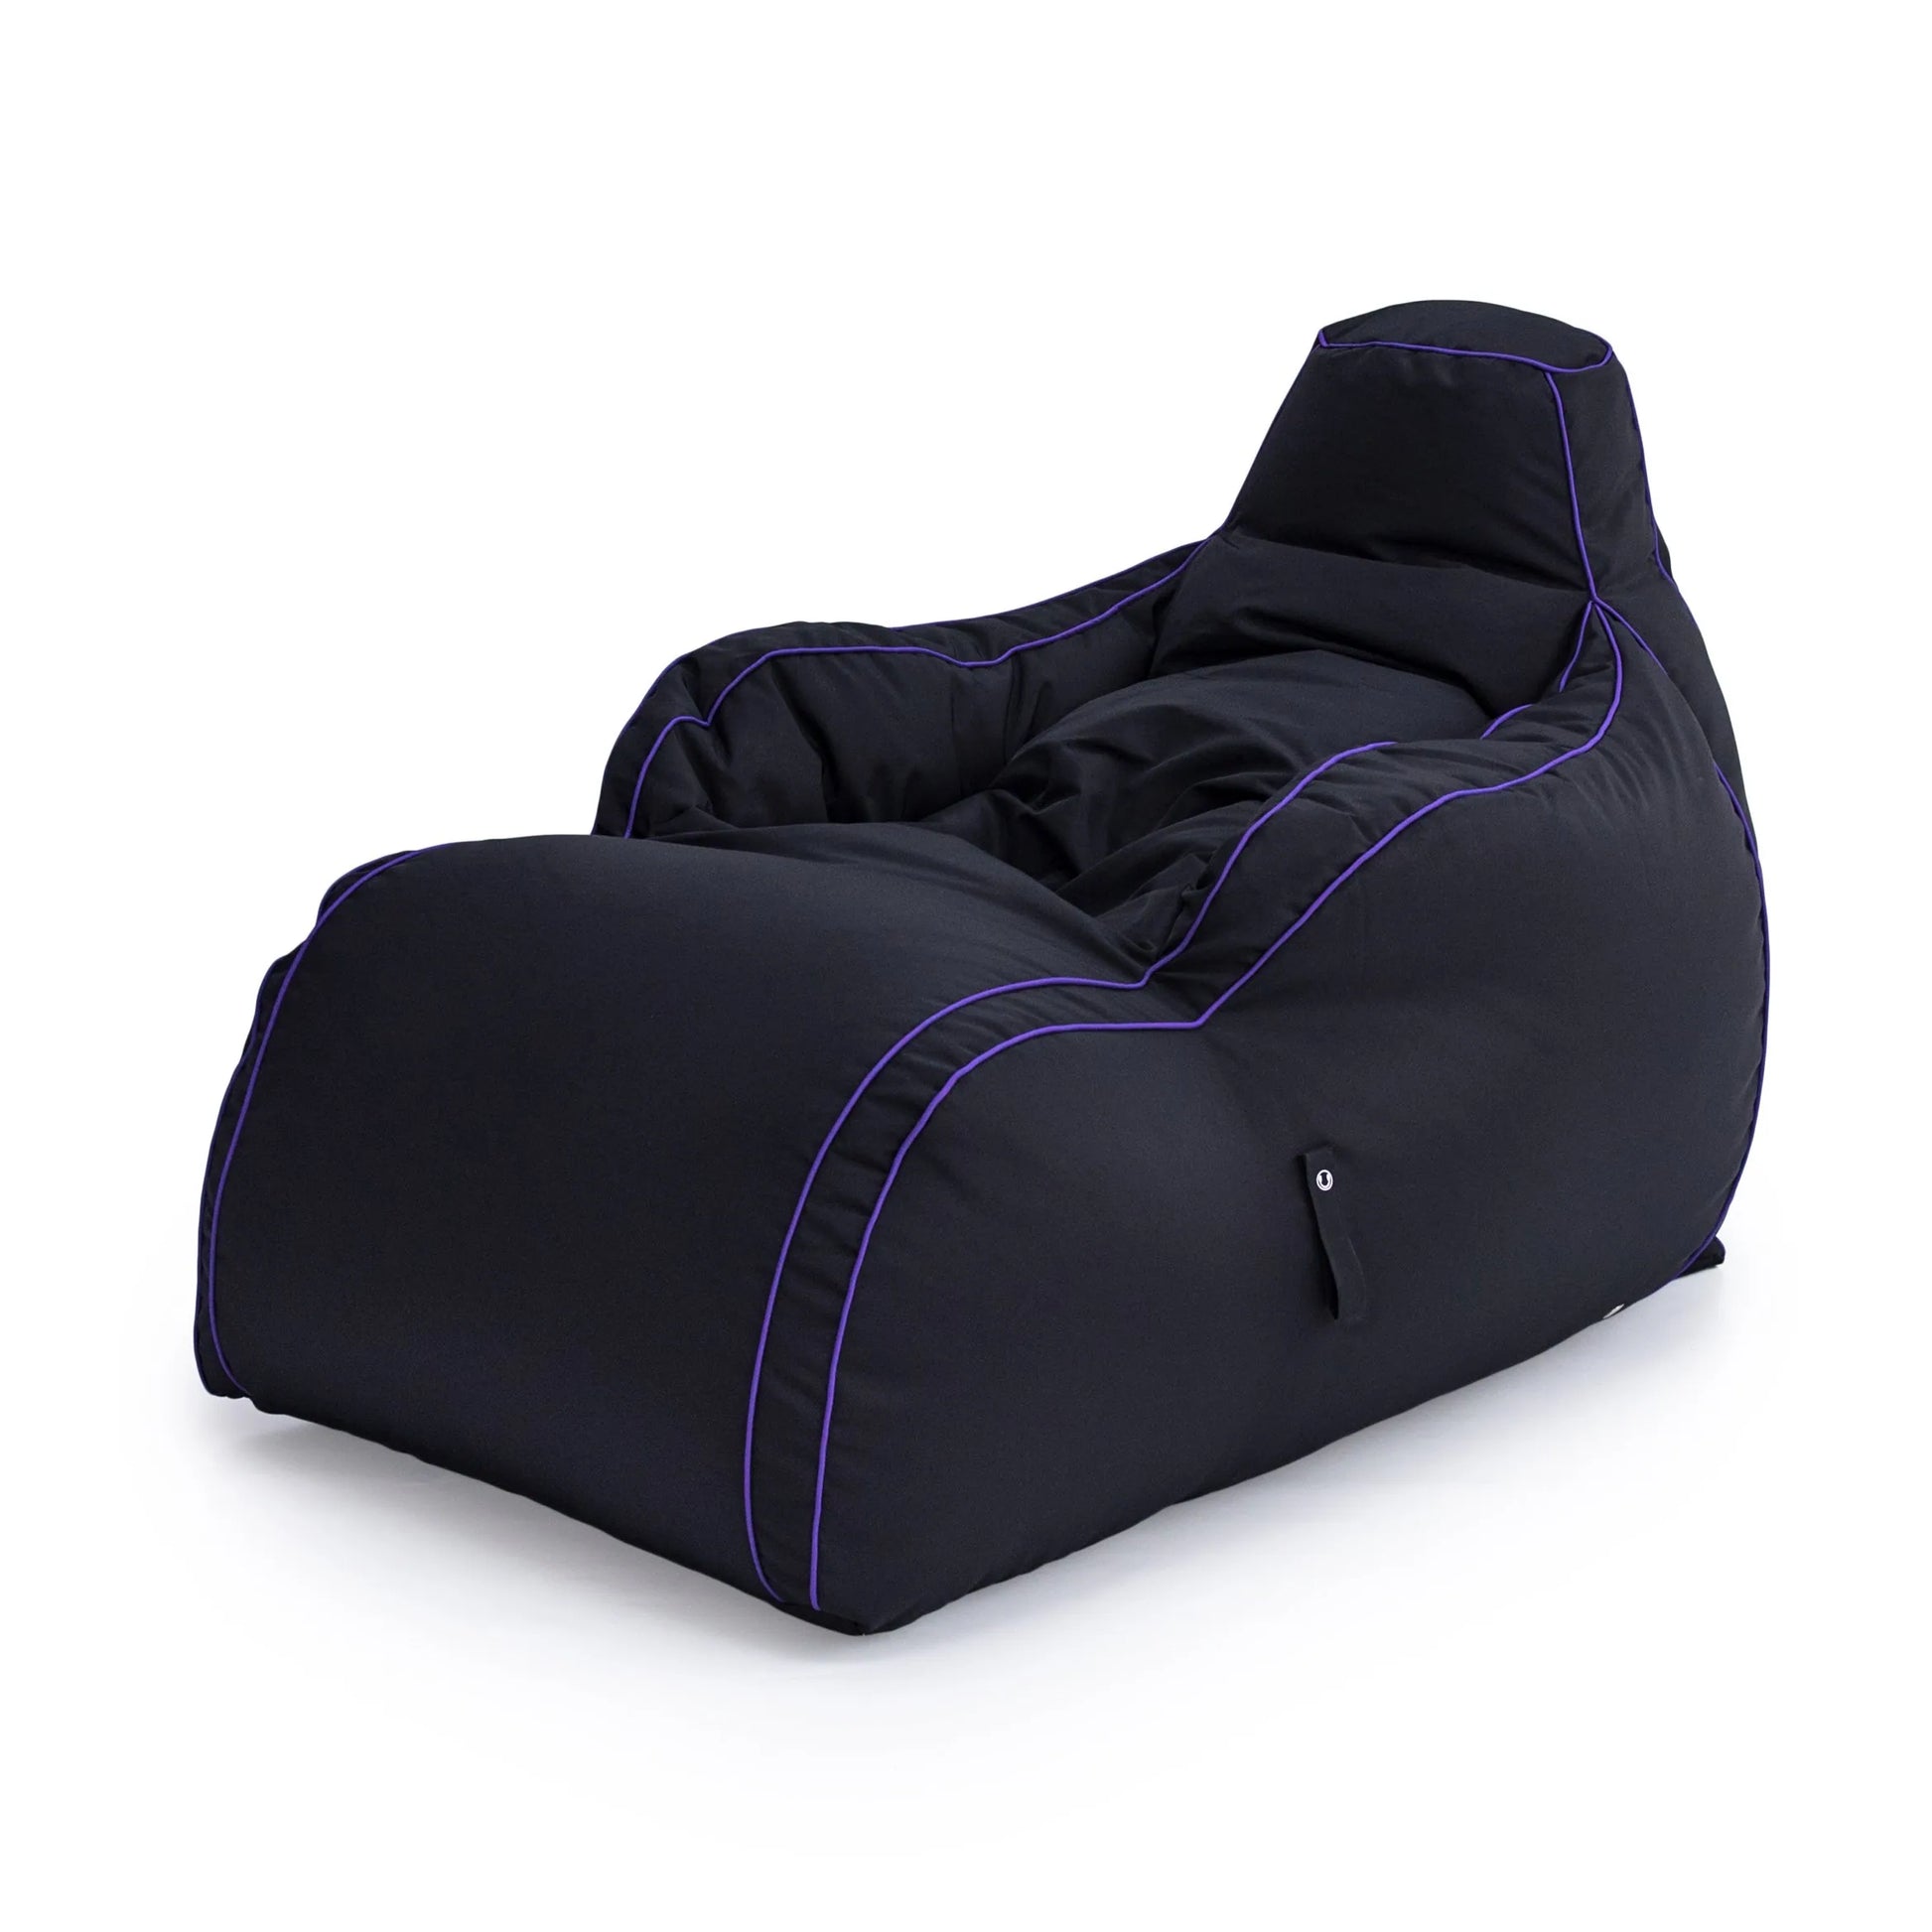 A black bean bag cover with purple trim sits on a white background.